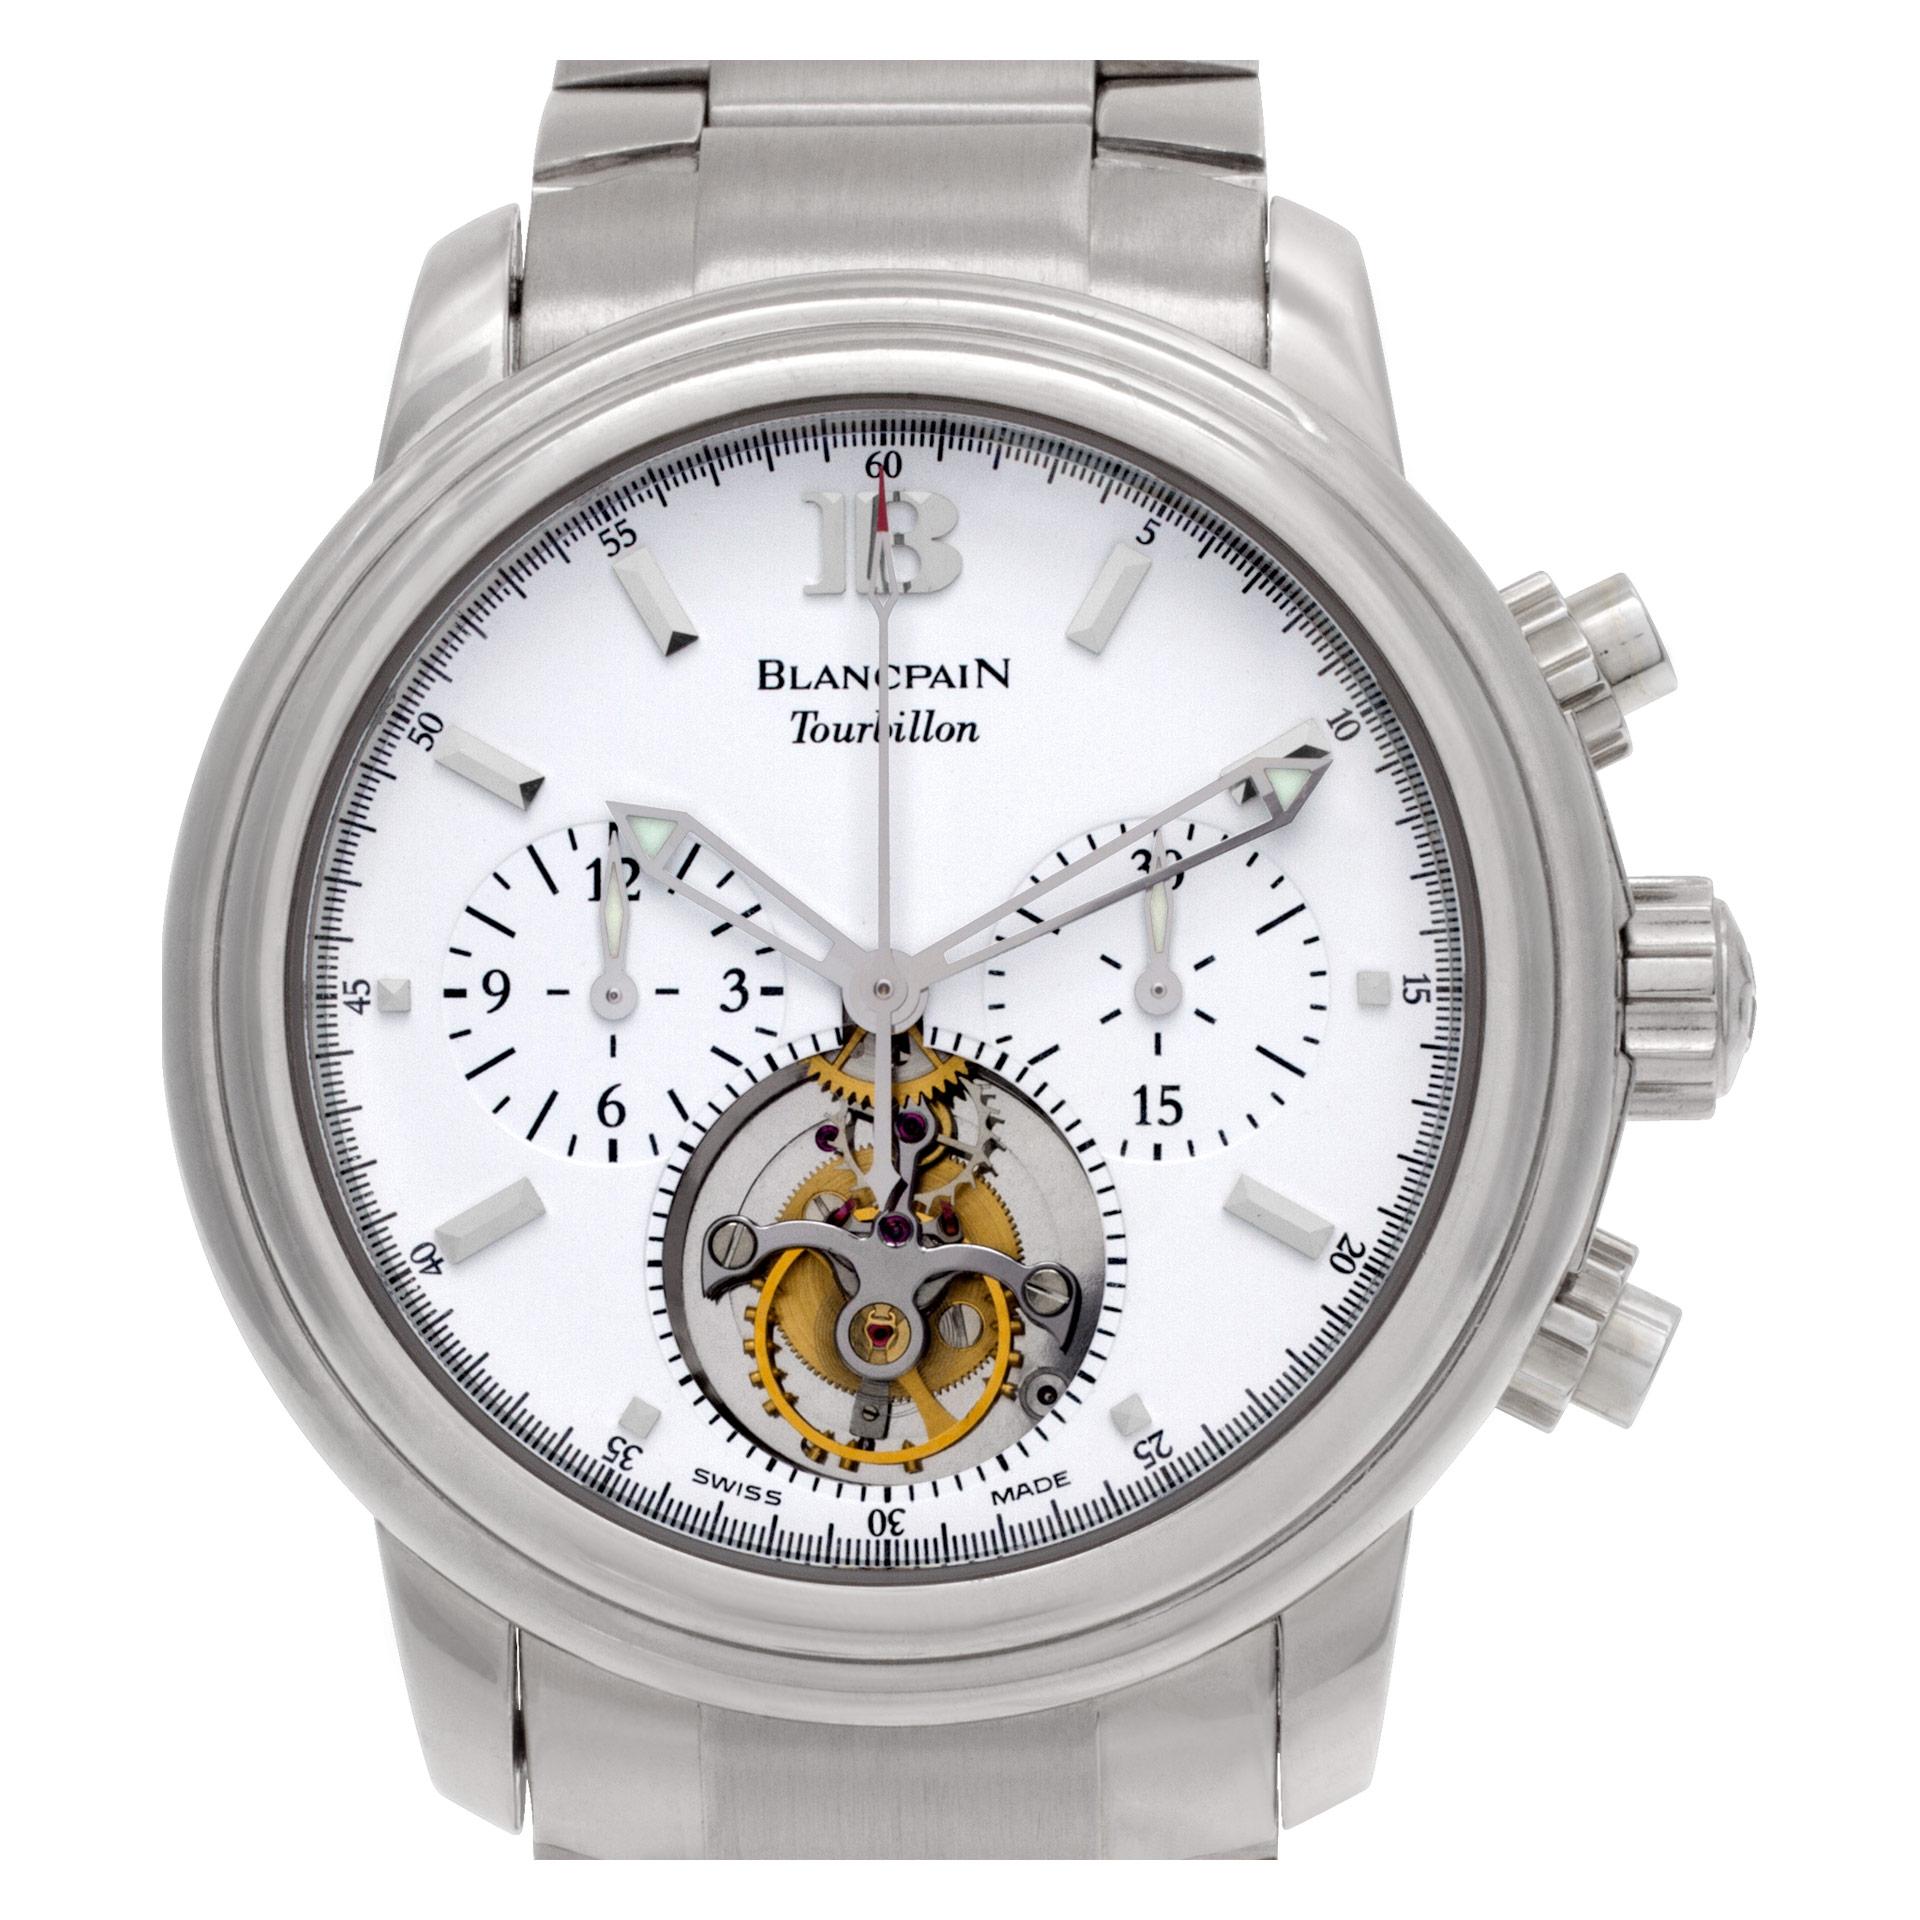 ESTIMATED RETAIL $135,000 - YOUR PRICE $48,900 - Blancpain Leman Tourbillon Chronograph in 18k white gold. Automatic movement under glass with chronograph, sub-seconds and tourbillon. 38 mm case size. Fine Pre-owned Blancpain Watch.

Certified